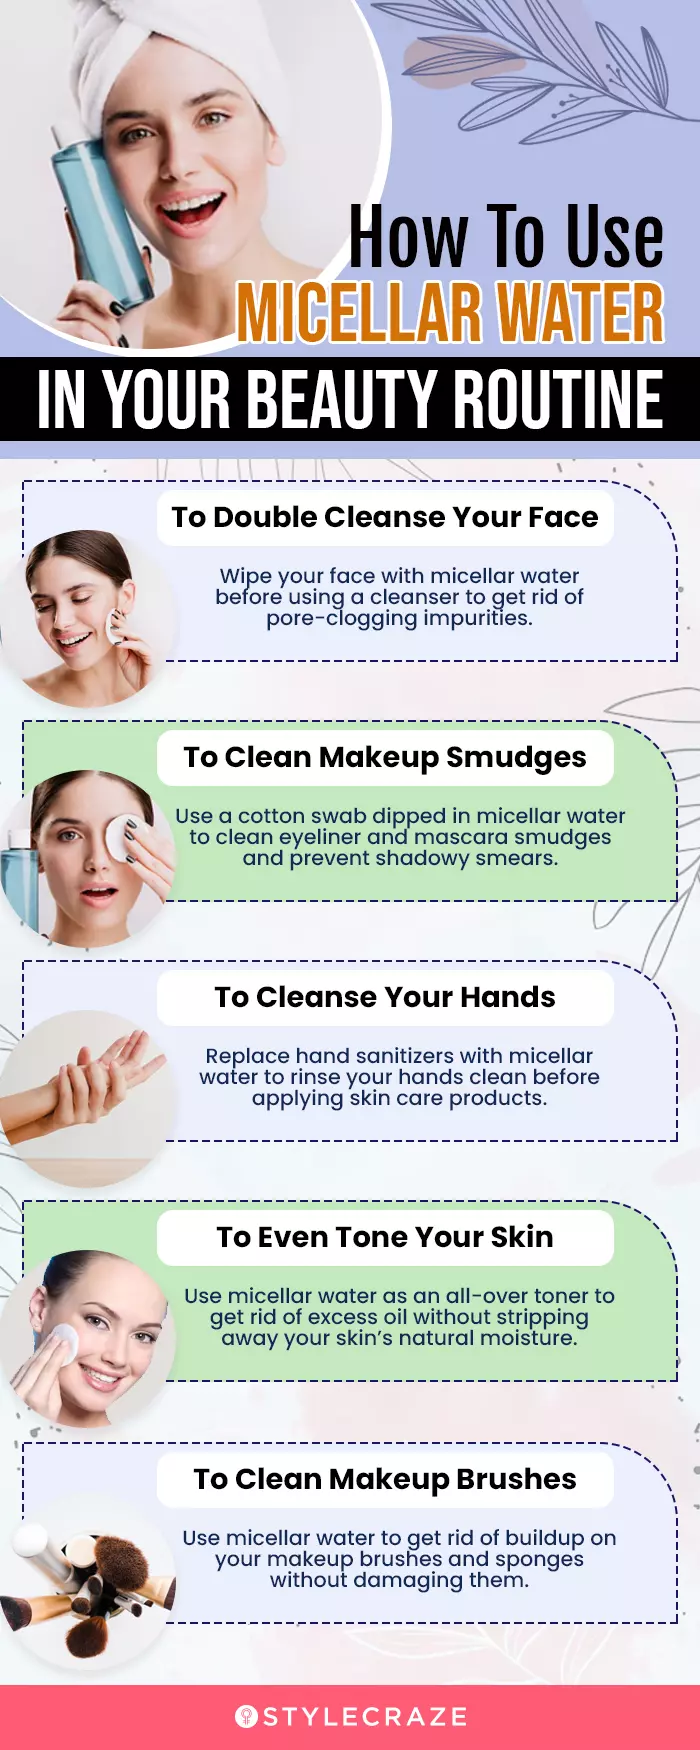 How To Use Micellar Water In Your Beauty Routine (infographic)